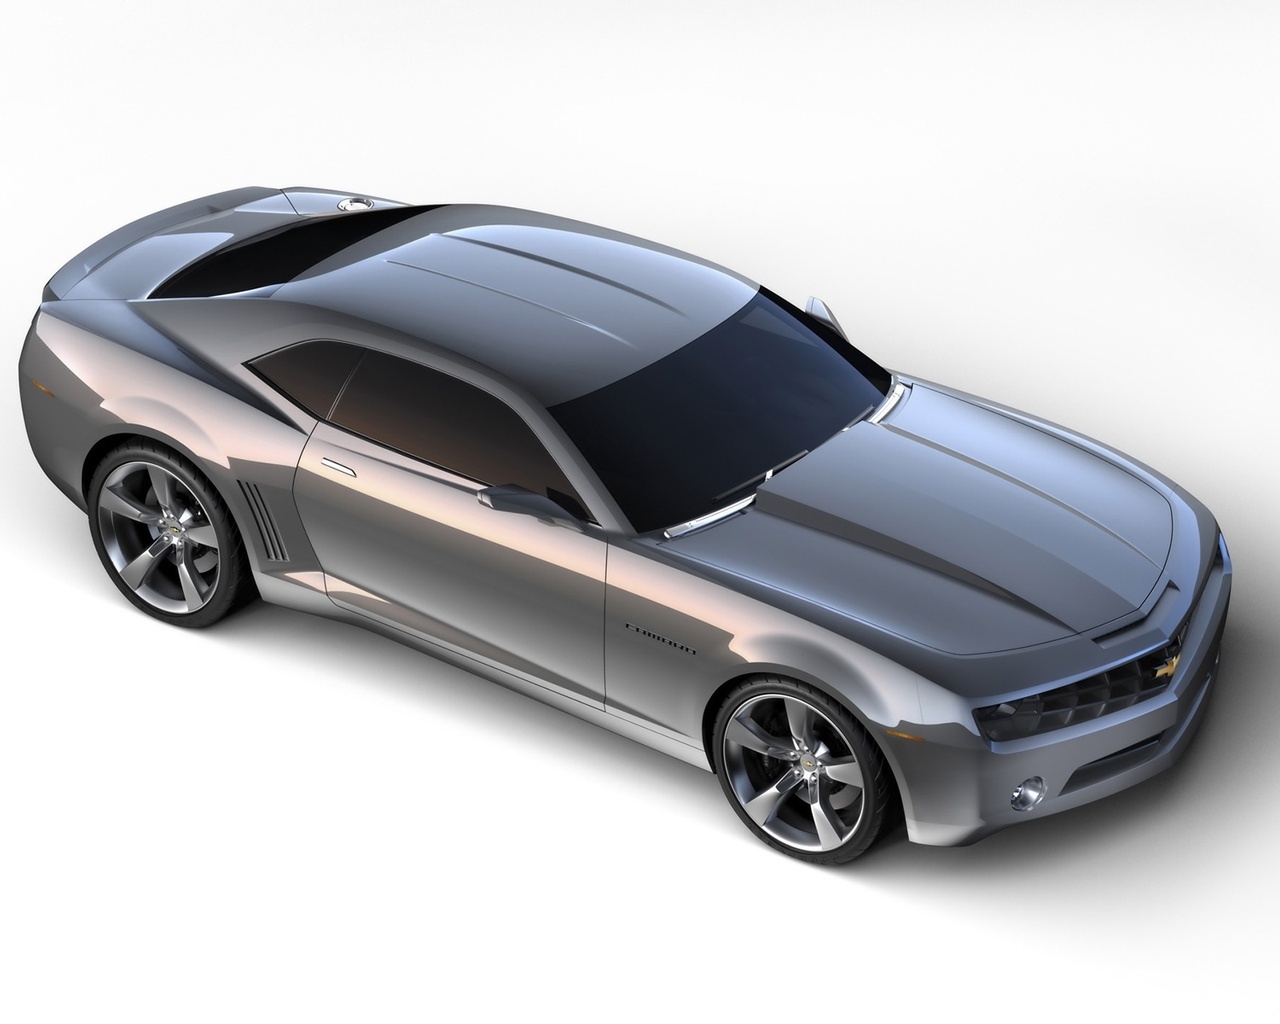 Chevrolet Camaro Grey Side Angle for 1280 x 1024 resolution